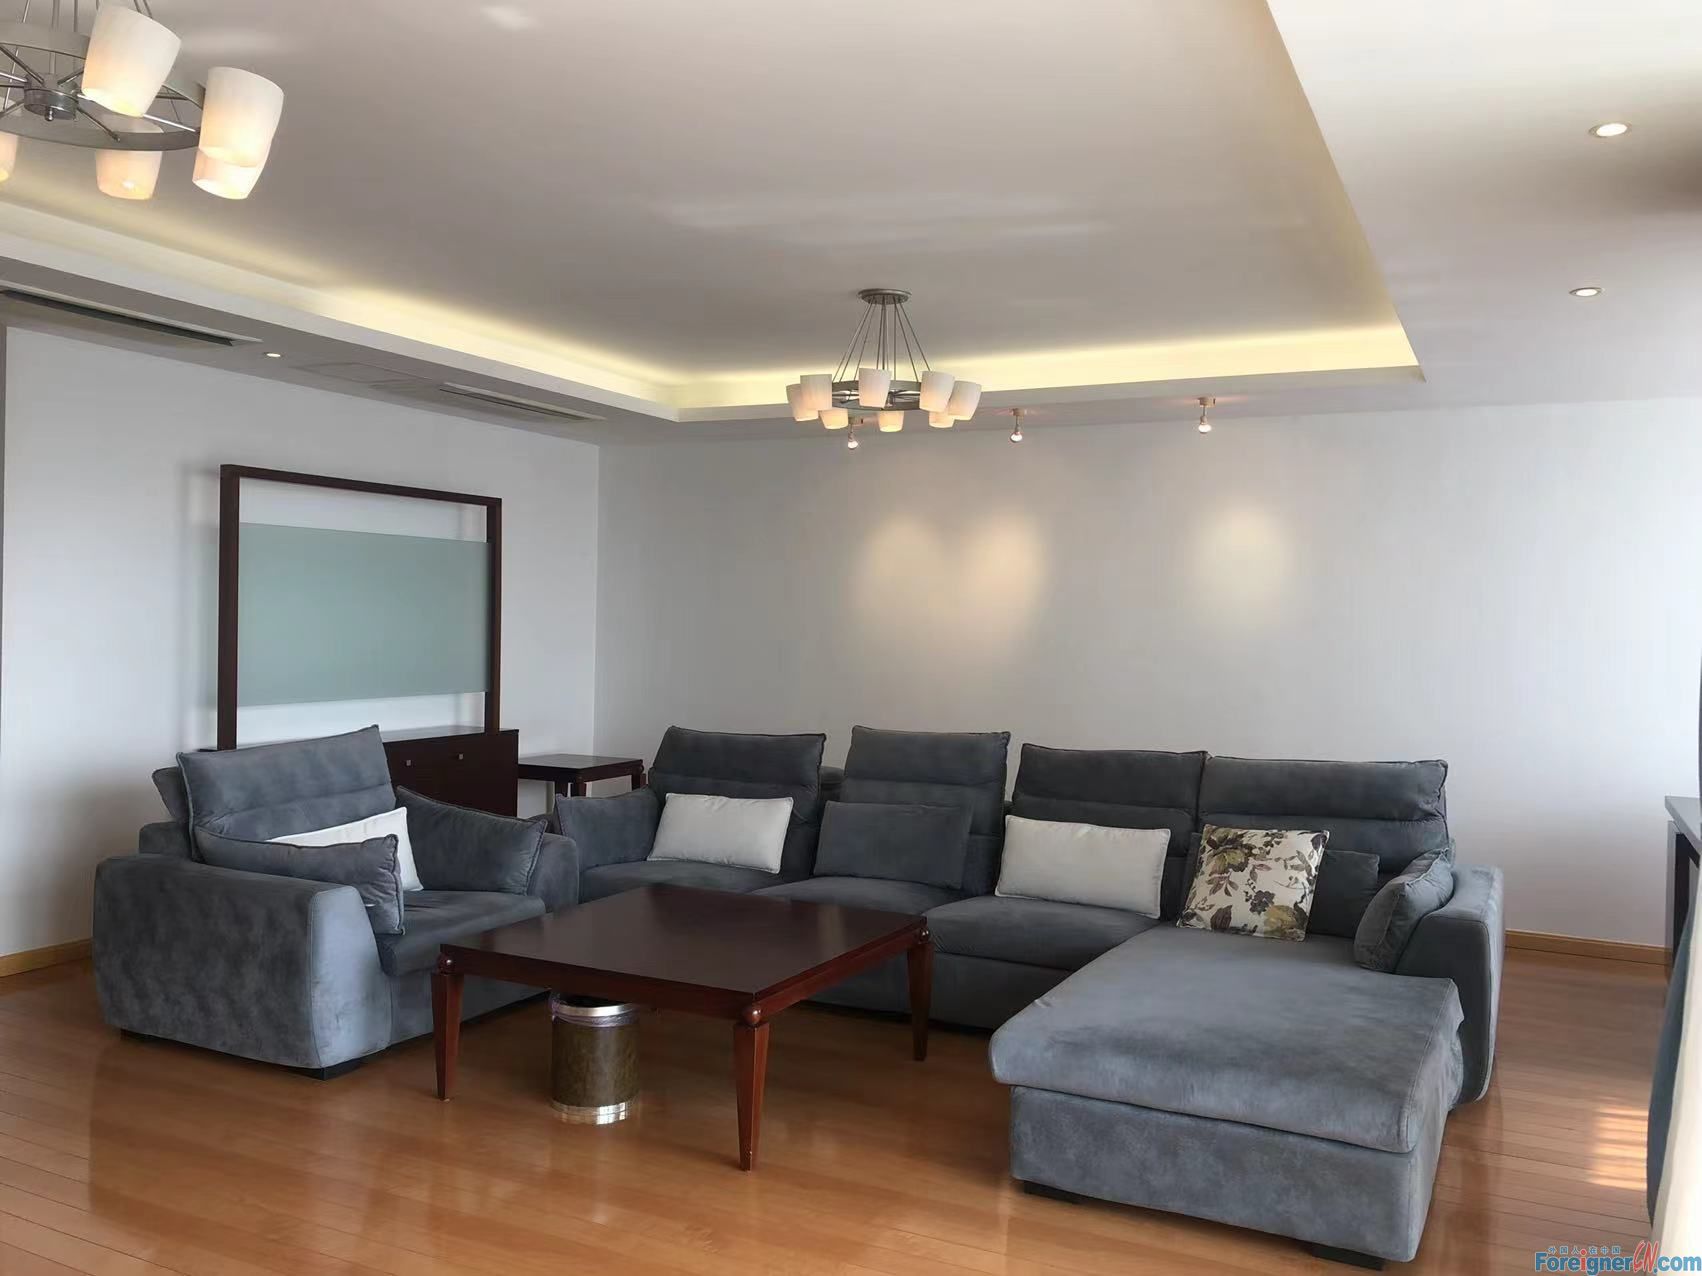 Gorgeous！！！ Bailing Mansion apartment rent in Suzhou/3 bedrooms and 2 bathrooms/big open kitchen/bathtub/ Xinghai Square /Suzhou Center Shopping Mall